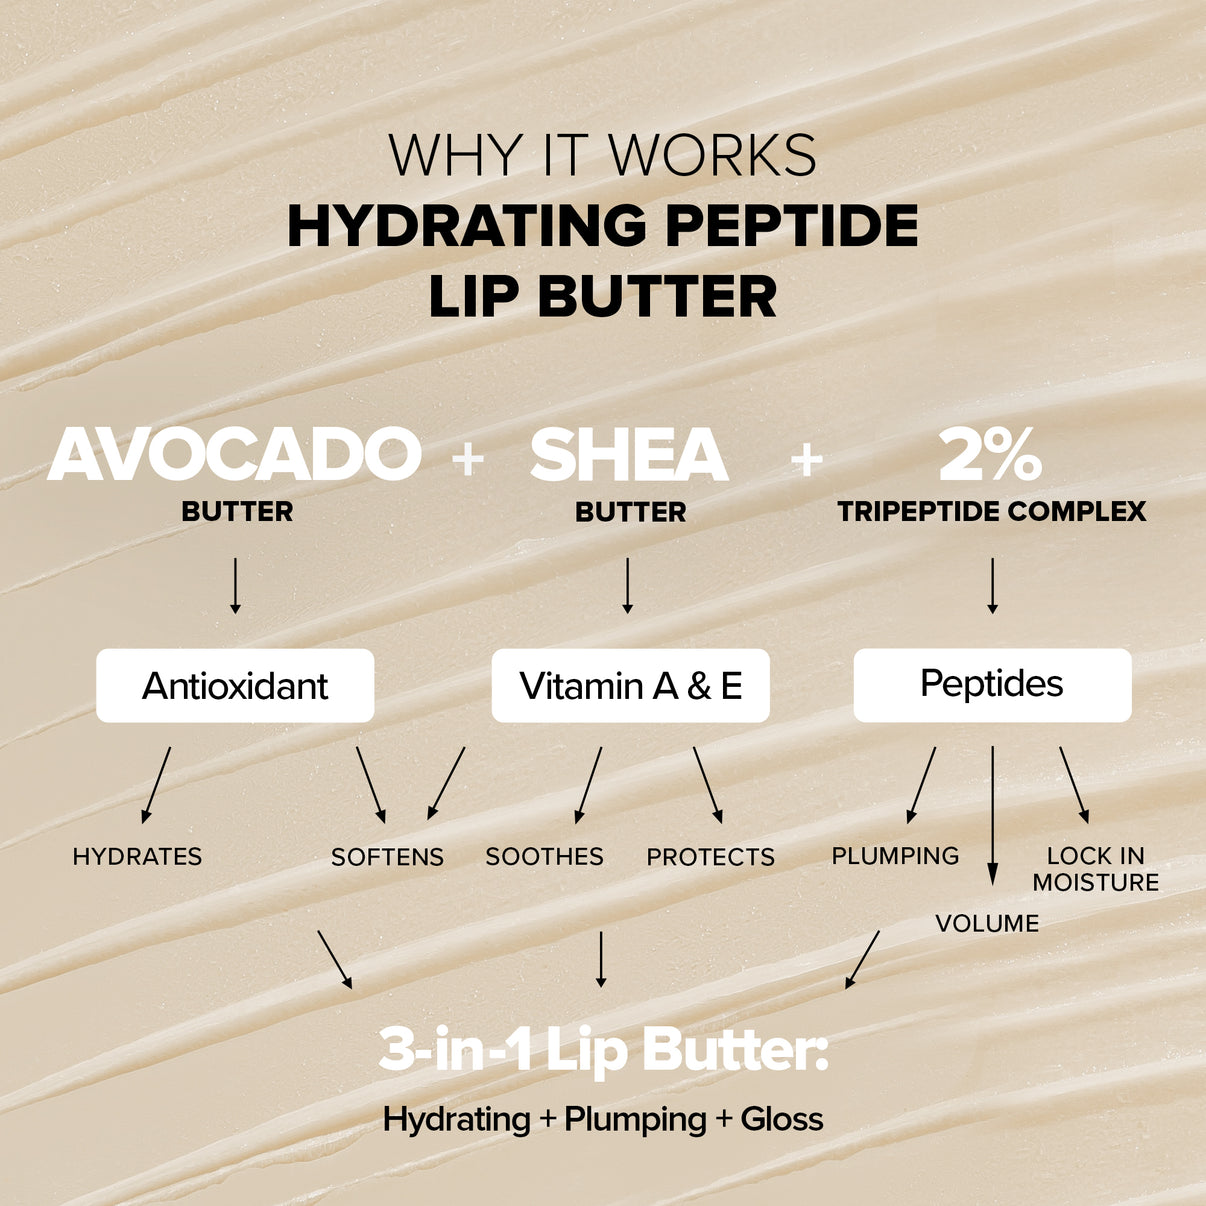 WHY IT WORKS HYDRATING PEPTIDE LIP BUTTER AVOCADO + SHEA BUTTER BUTTER 十 2% TRIPEPTIDE COMPLEX Antioxidant Vitamin A & E Peptides HYDRATES SOFTENS SOOTHES PROTECTS PLUMPING LOCK IN MOISTURE VOLUME 3-in-1 Lip Butter: Hydrating + Plumping + Gloss